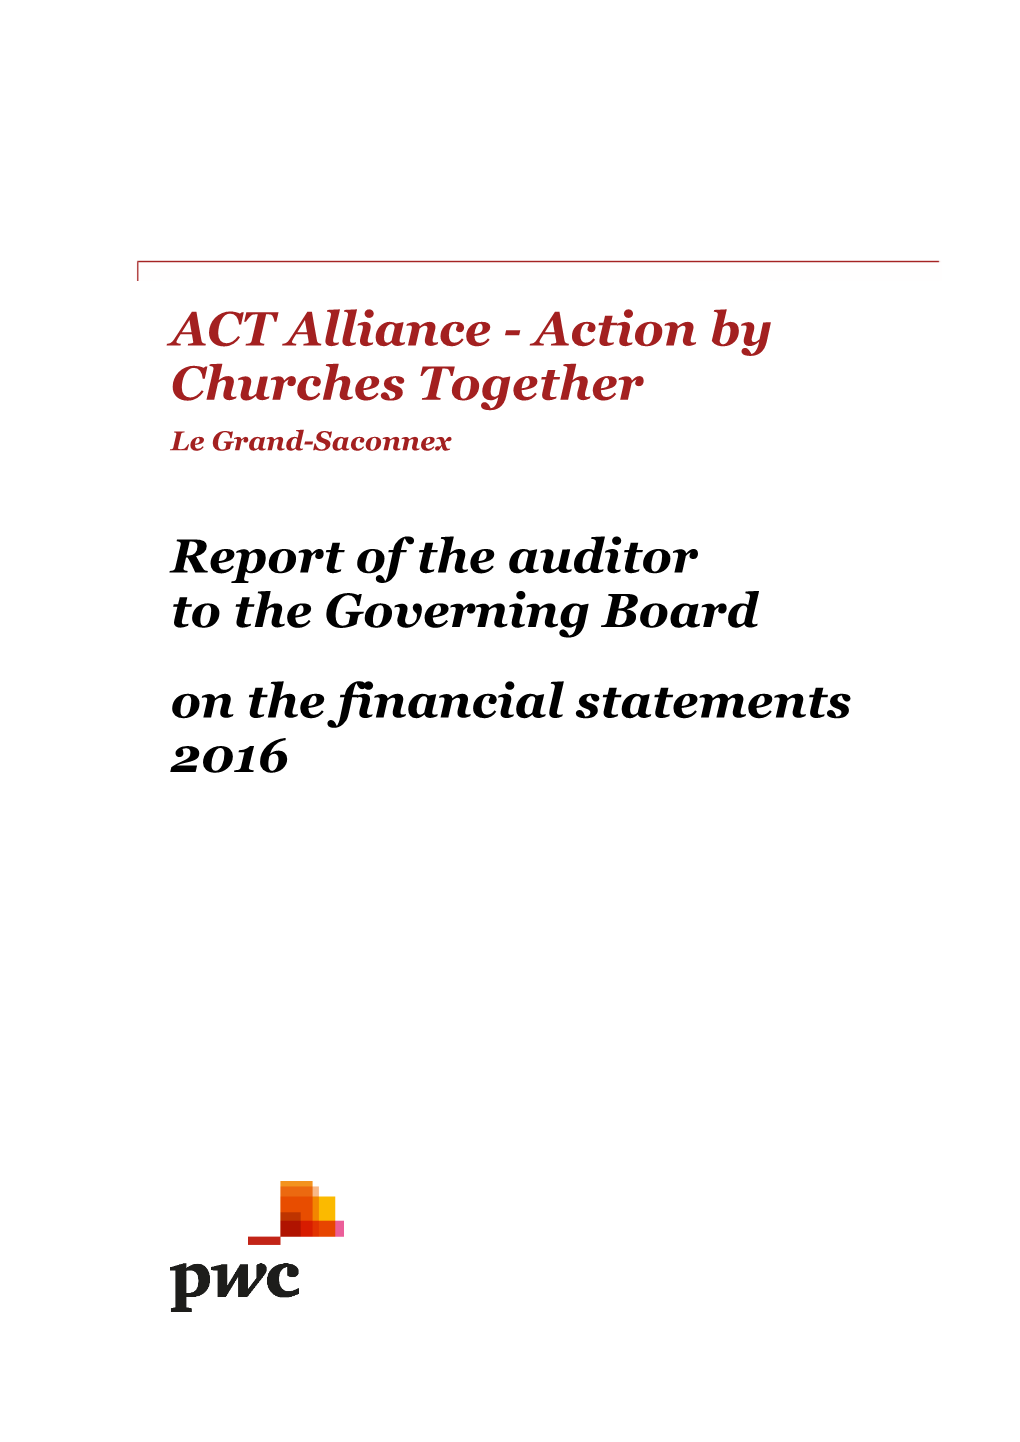 Action by Churches Together Report of the Auditor to the Governing Board on the Financial Statements 2016